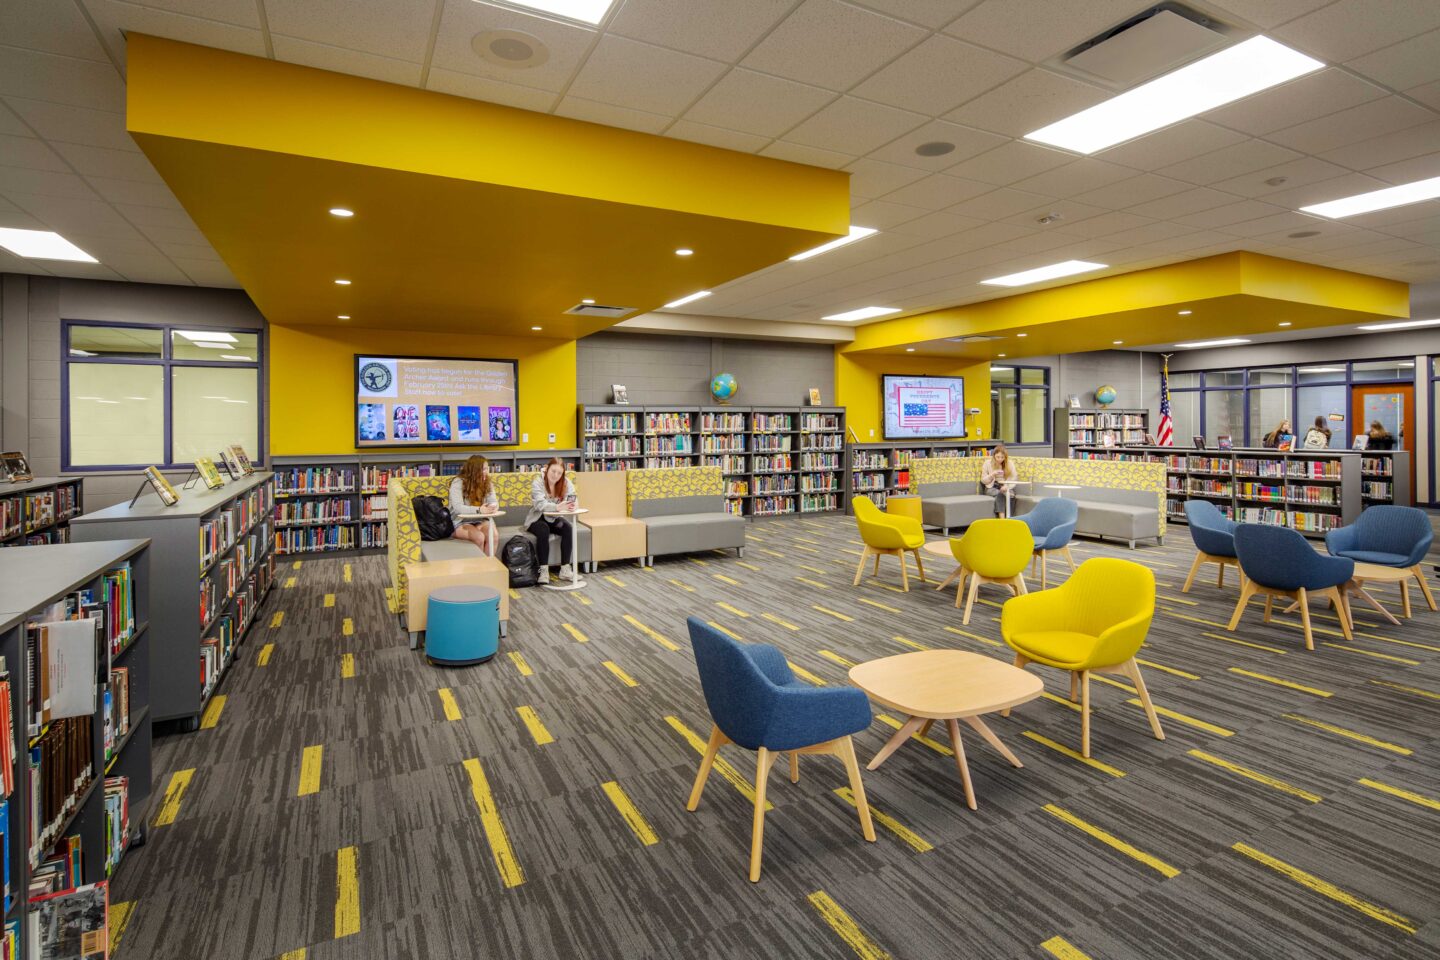 A library space comes to life with brightly colored, modern furniture and yellow call-out features in the ceiling